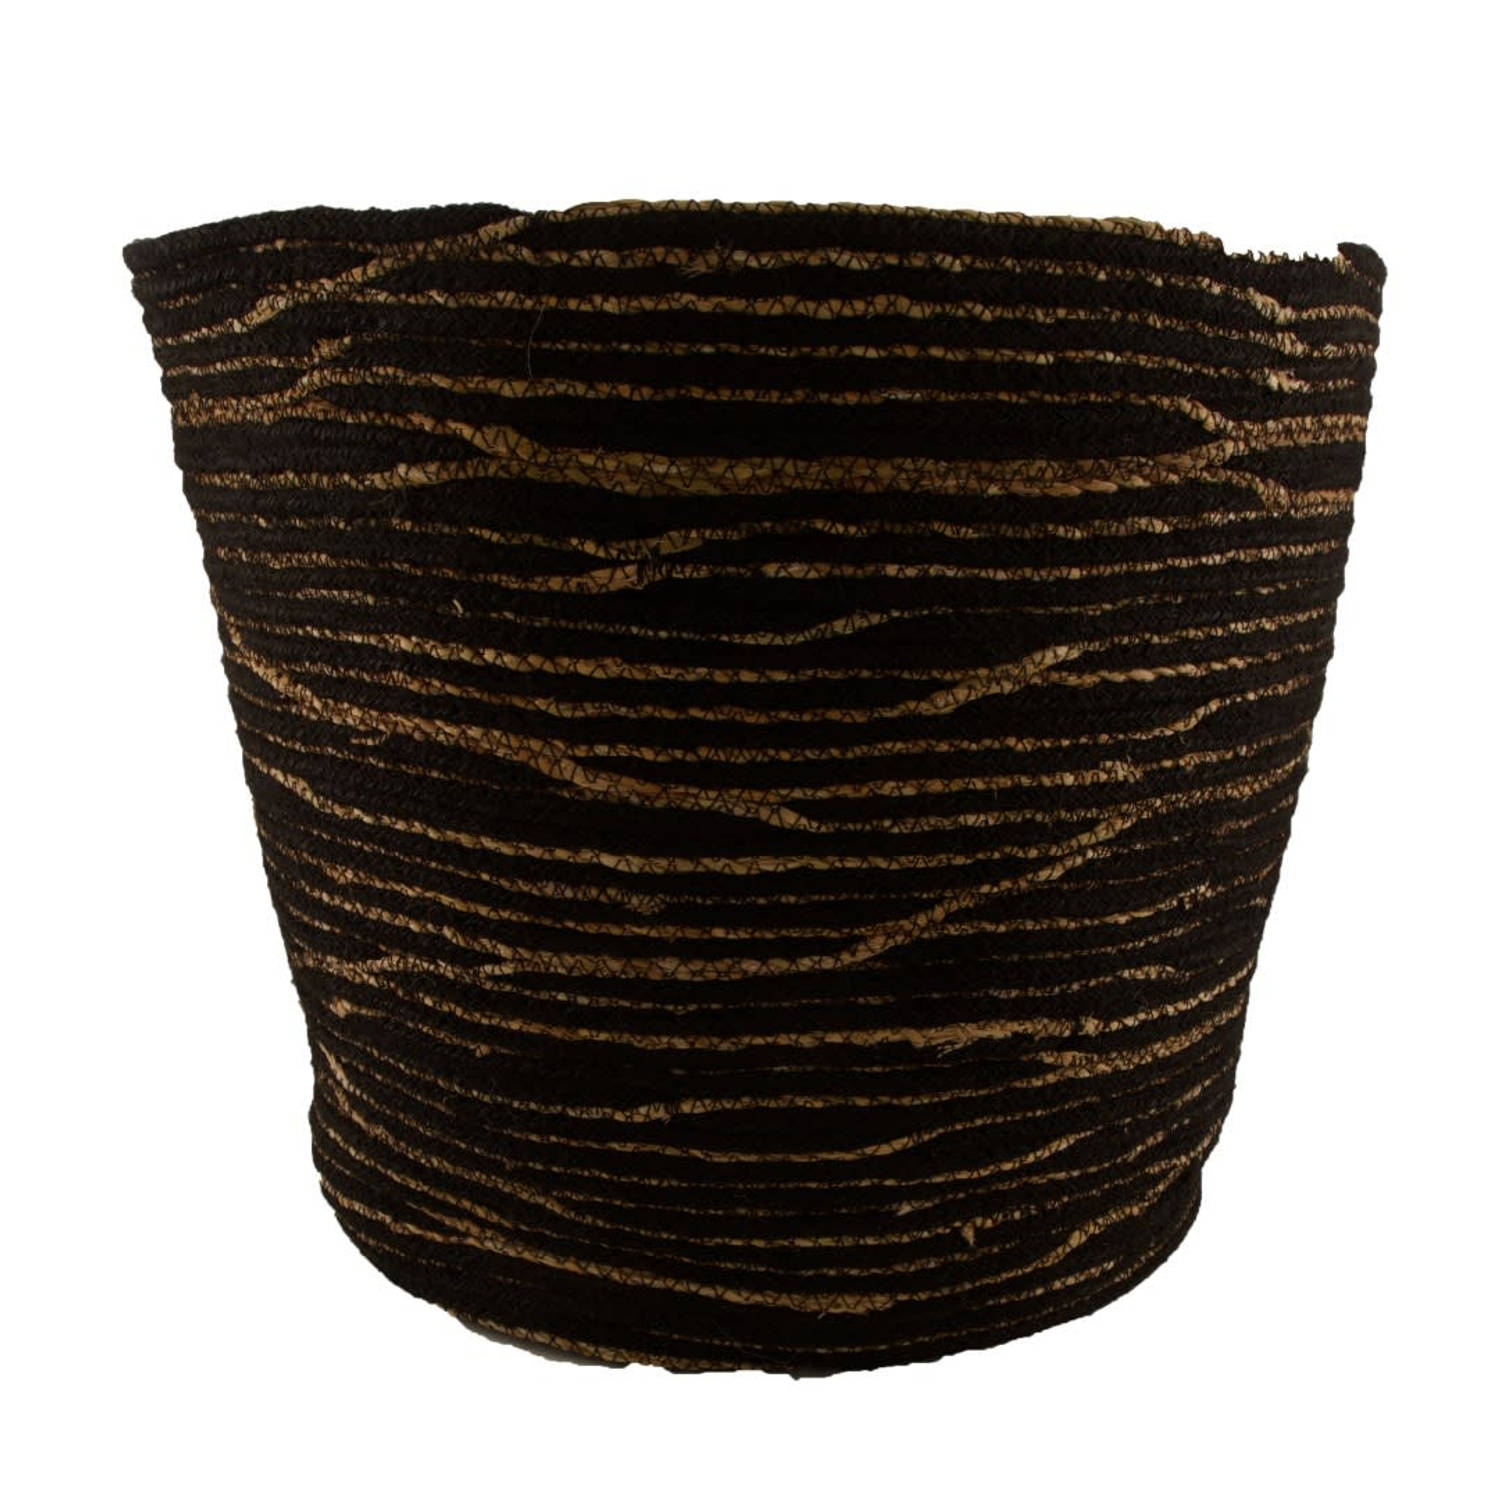 Dijk Natural Collections - Basket seagrass nature with plastic 38x36cm - Zwart